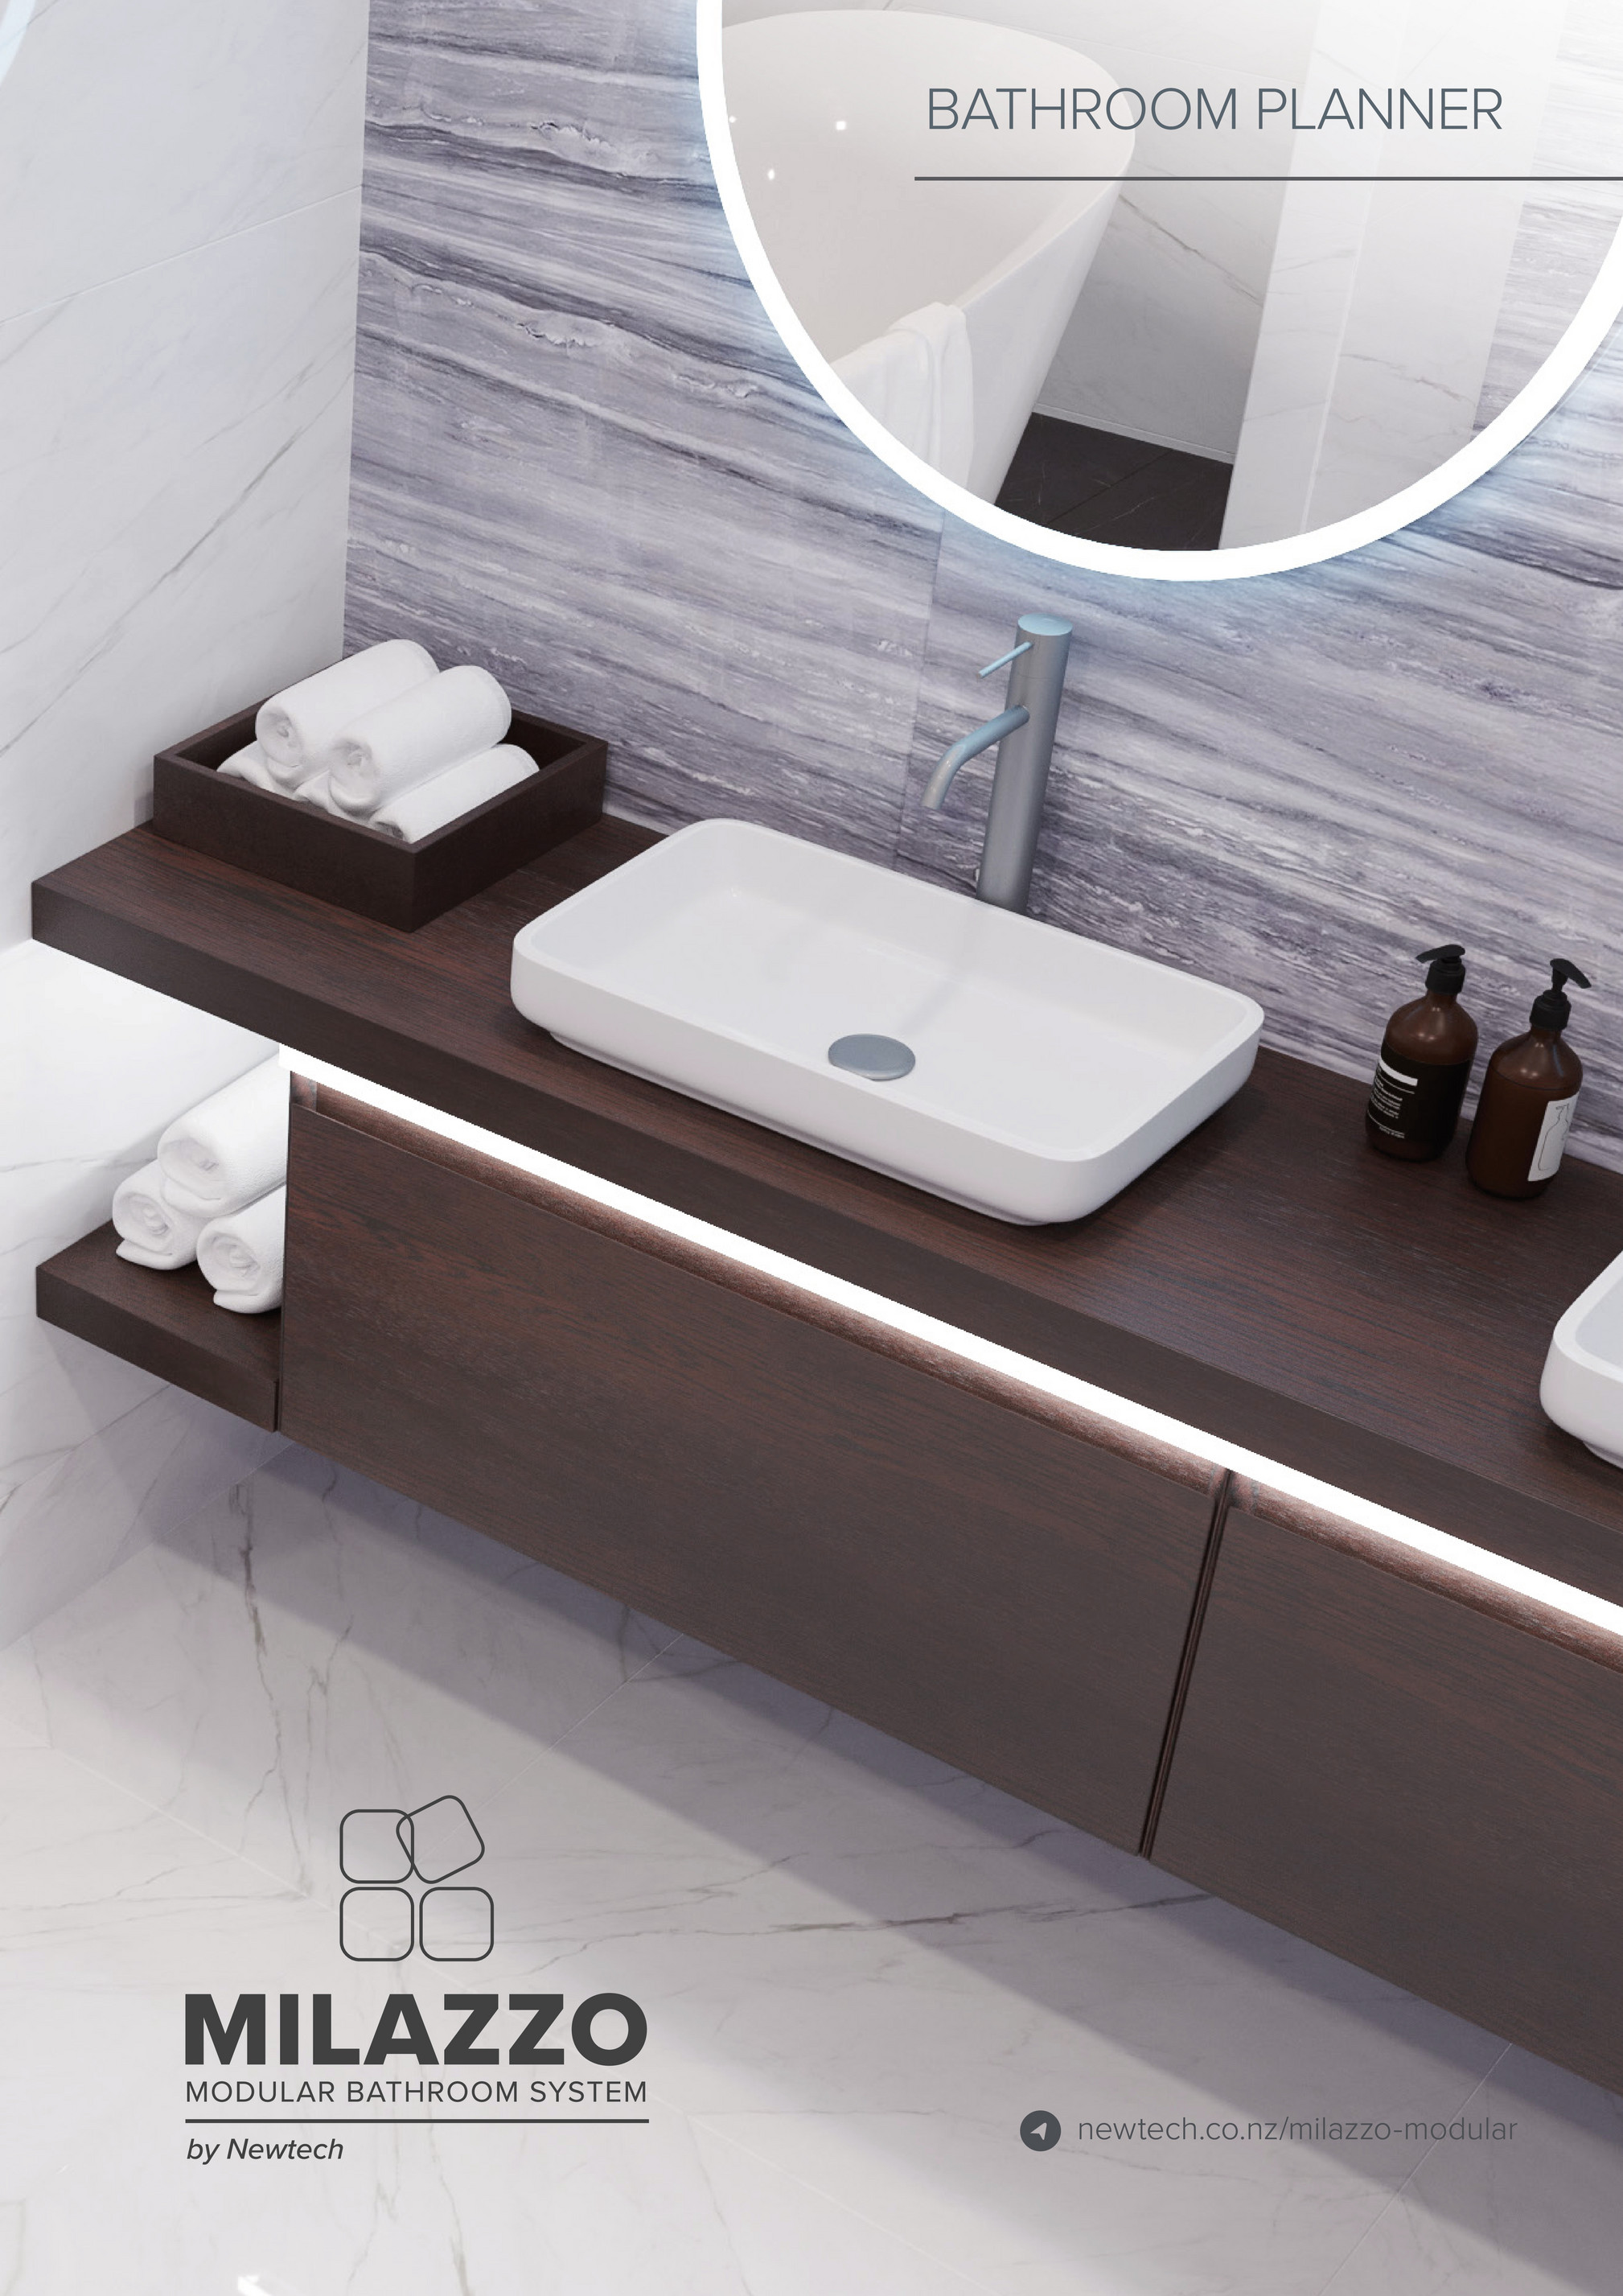 Newtech Bathroomware Milazzo Bathroom Planner Page 1 Created With Publitascom